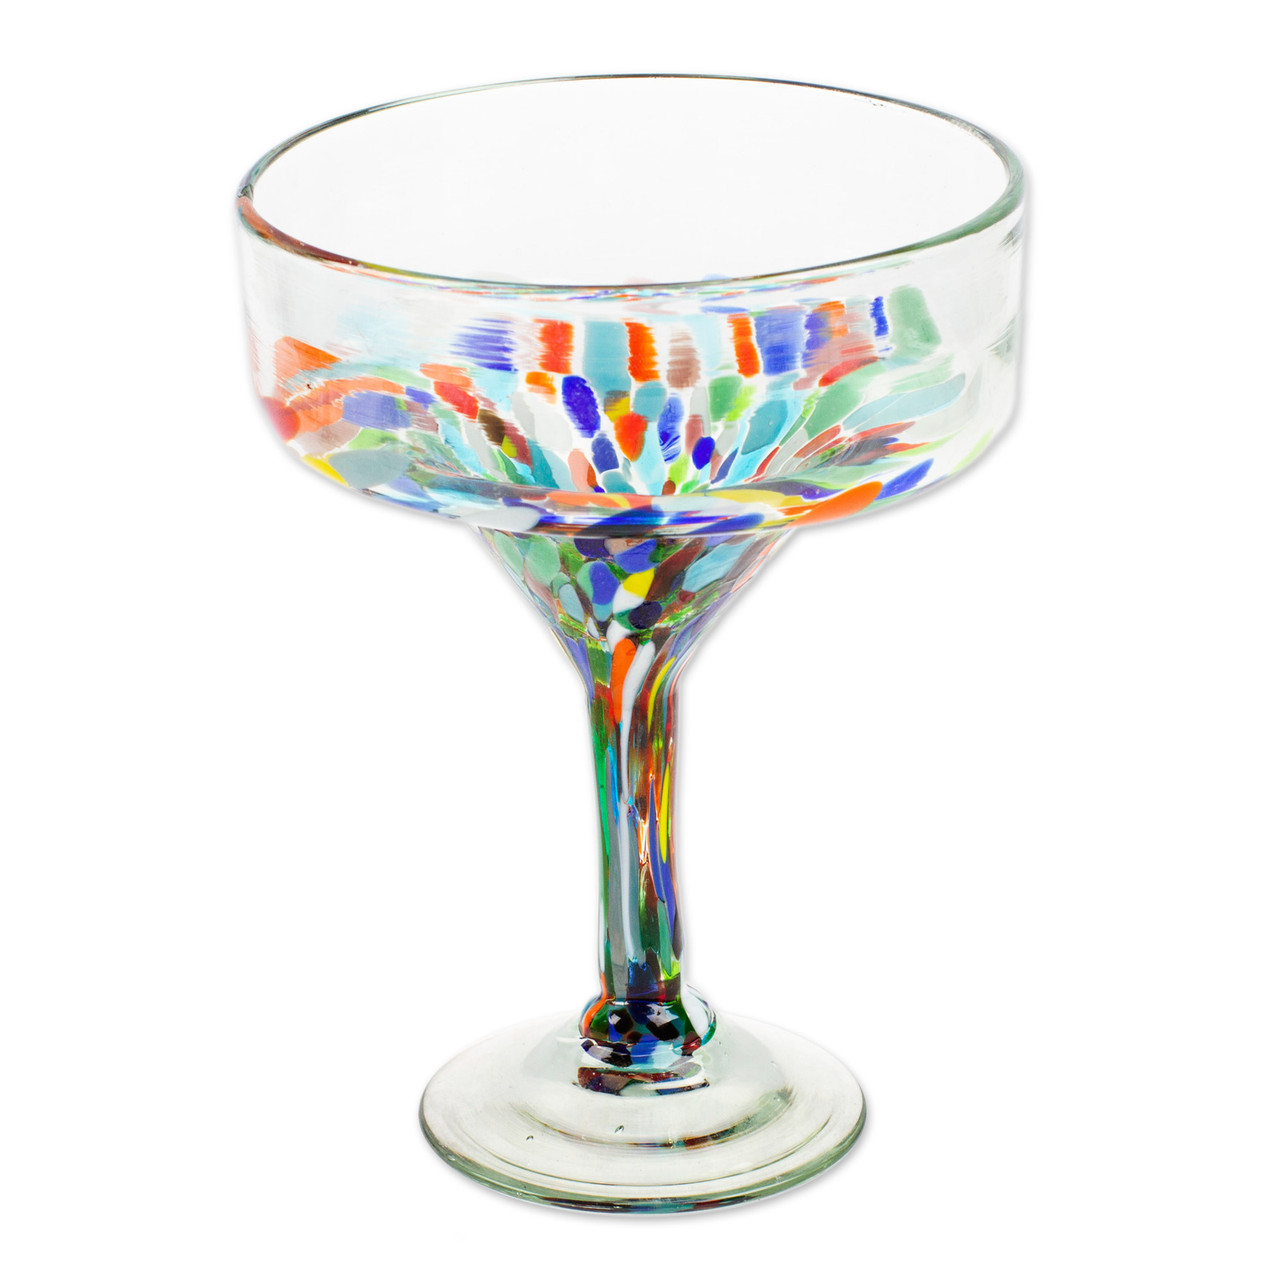 Two Colorful Cocktail Glasses Handblown from Recycled Glass - Chromatic  Gala